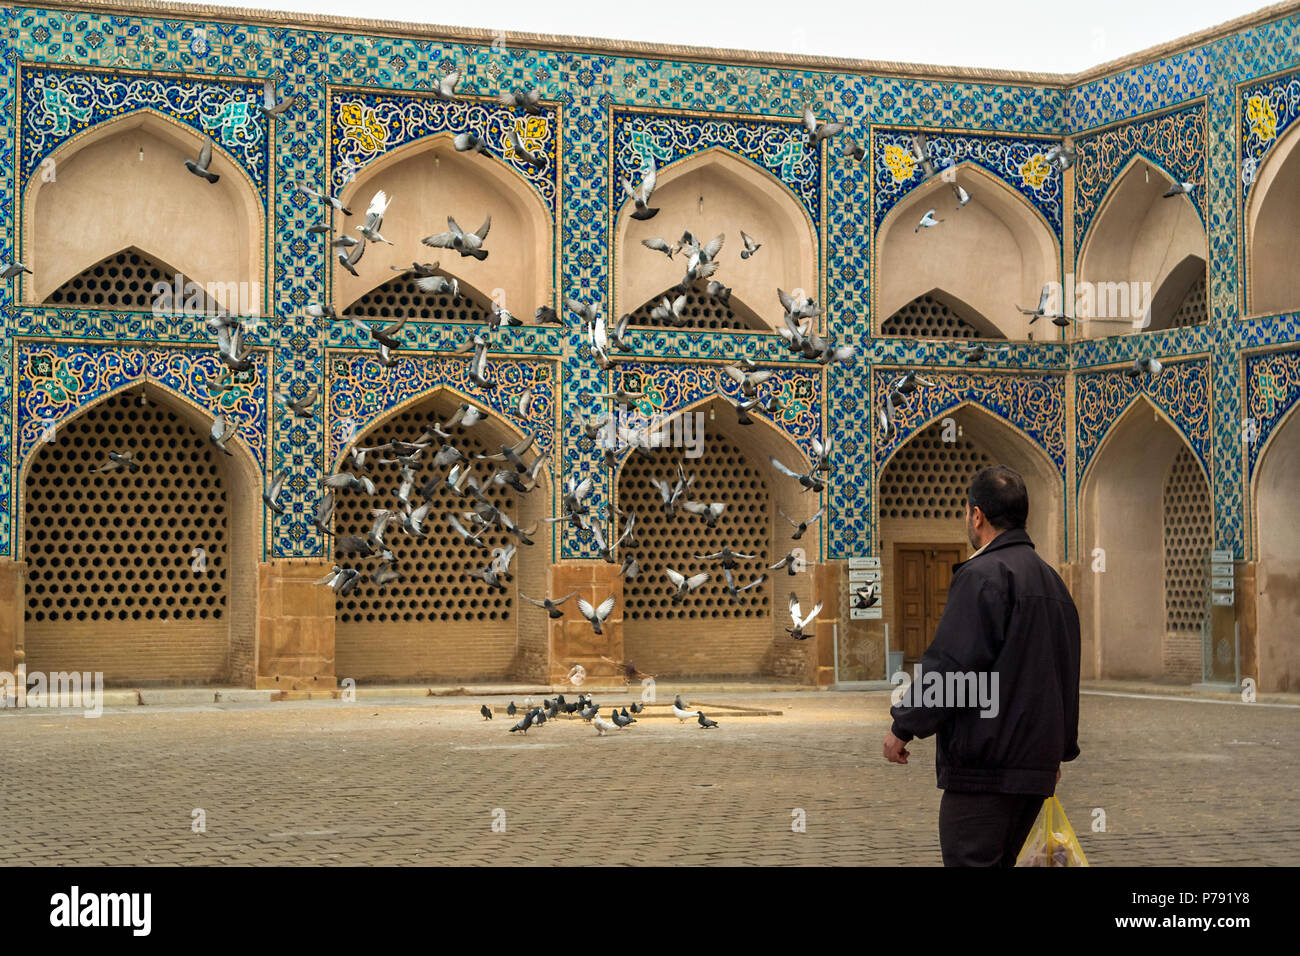 A flock of pigeons feeding in the open square of an Iranian mosque take flight after being startled. Stock Photo